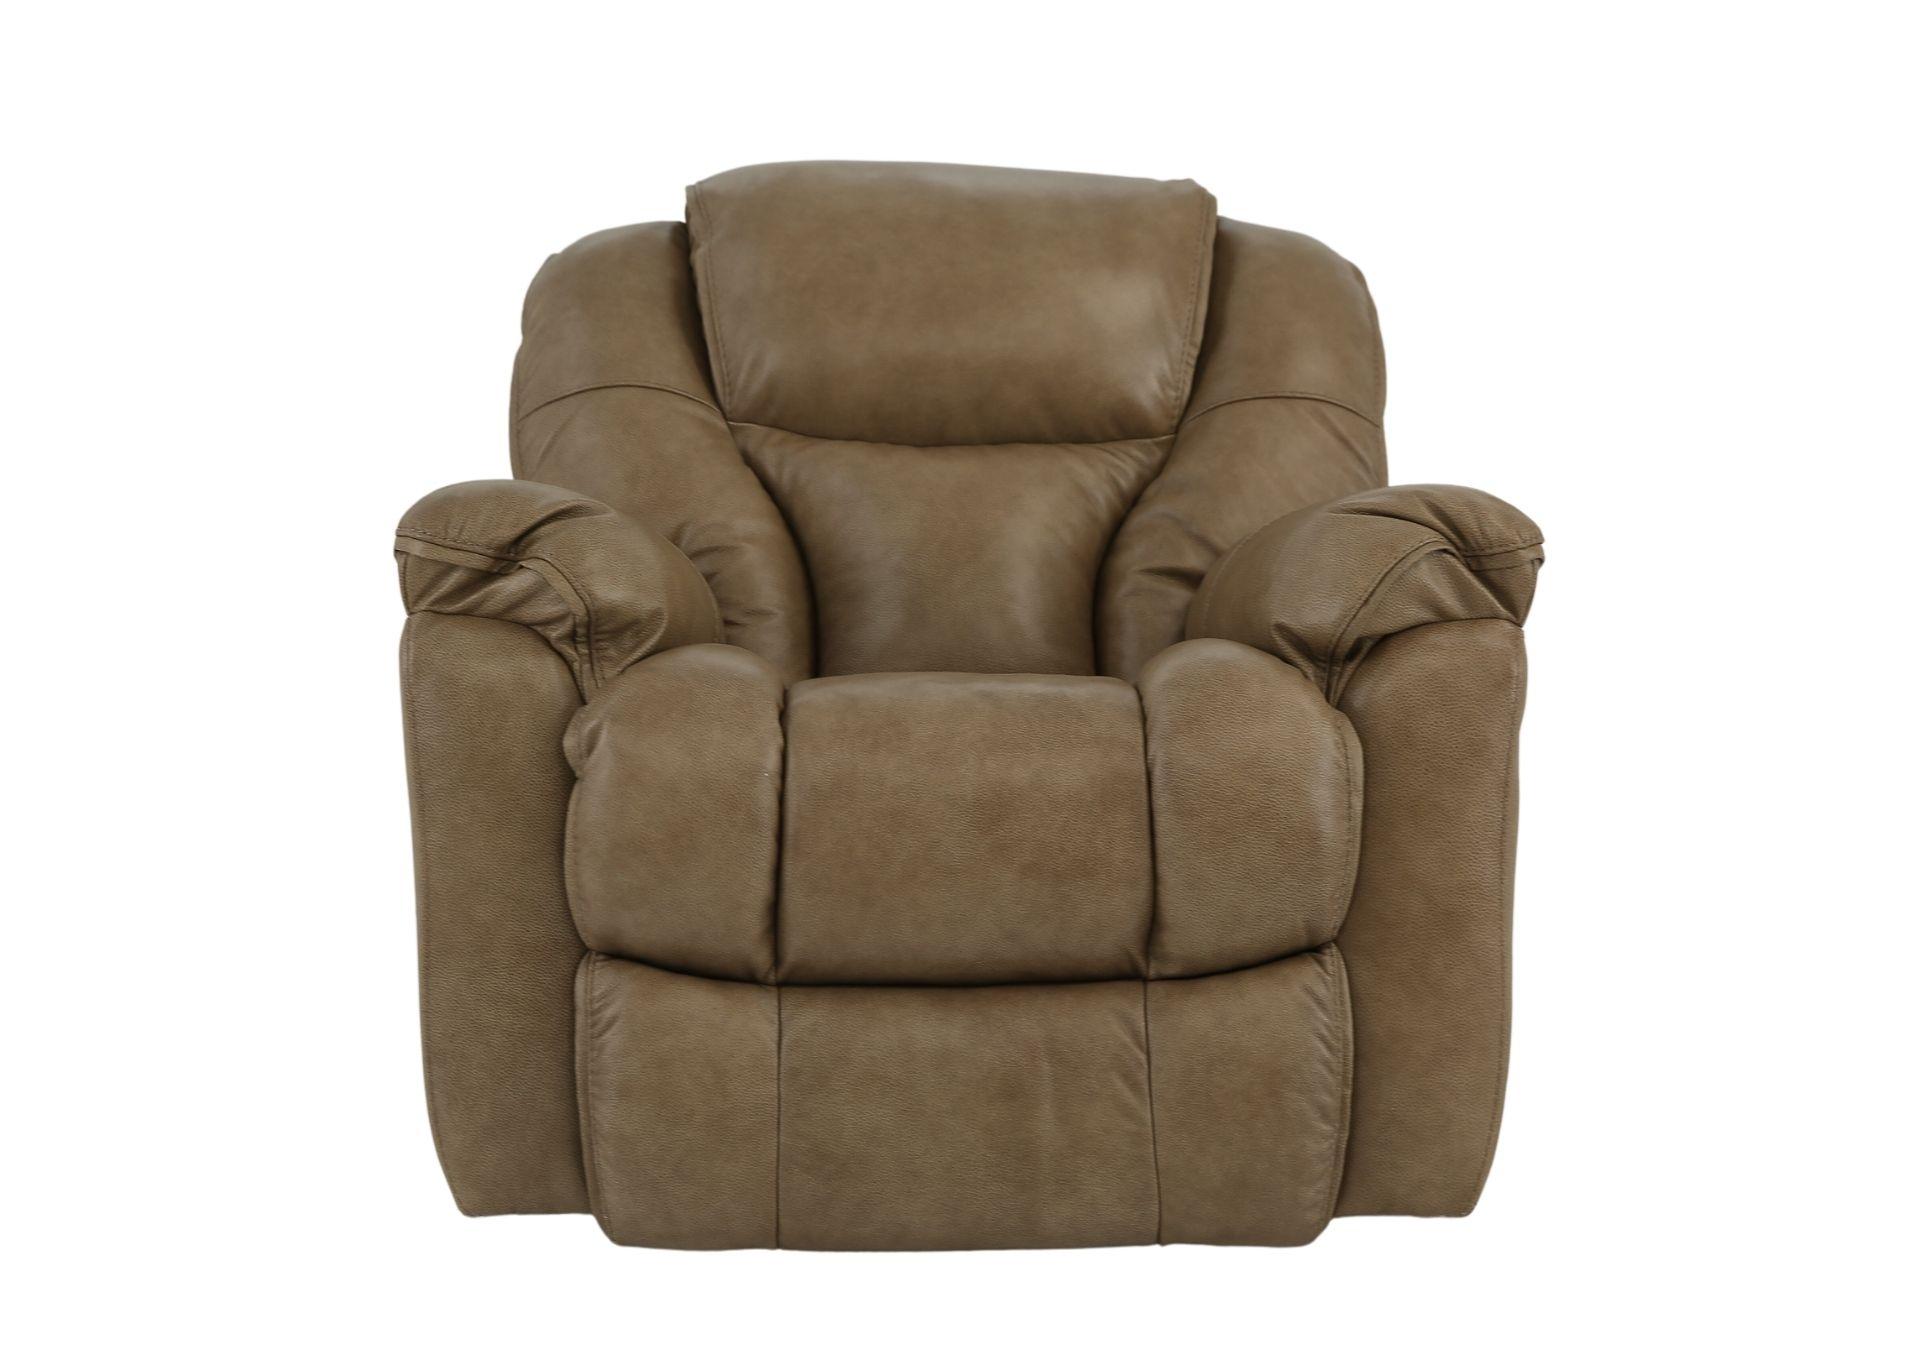 MUSTANG STONE LEATHER ROCKER RECLINER